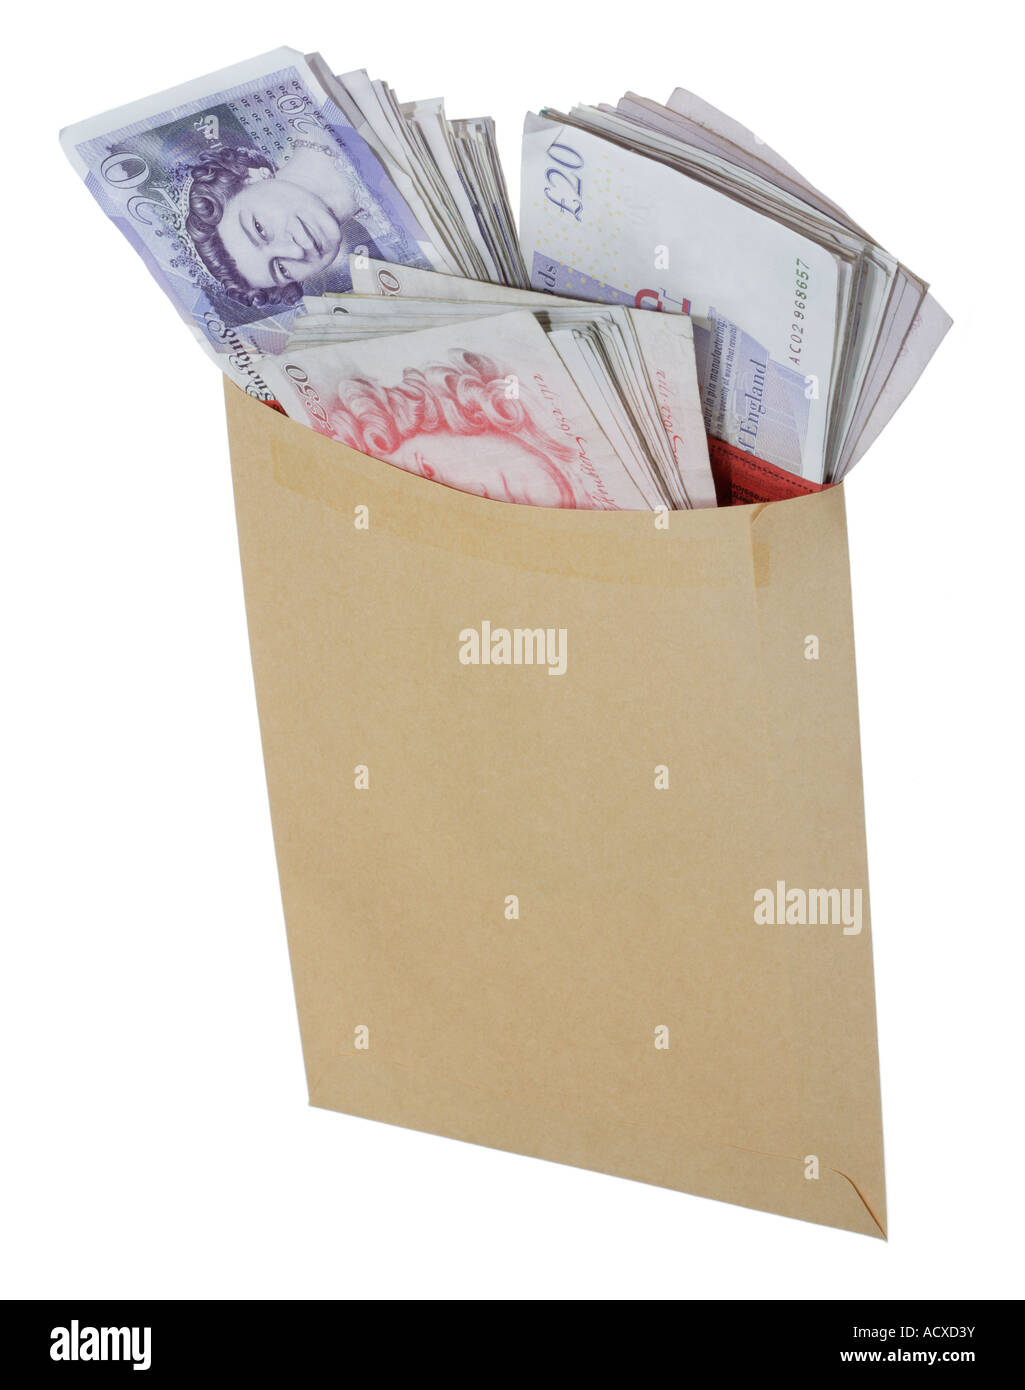 Cash and a brown envelope Used notes Stock Photo